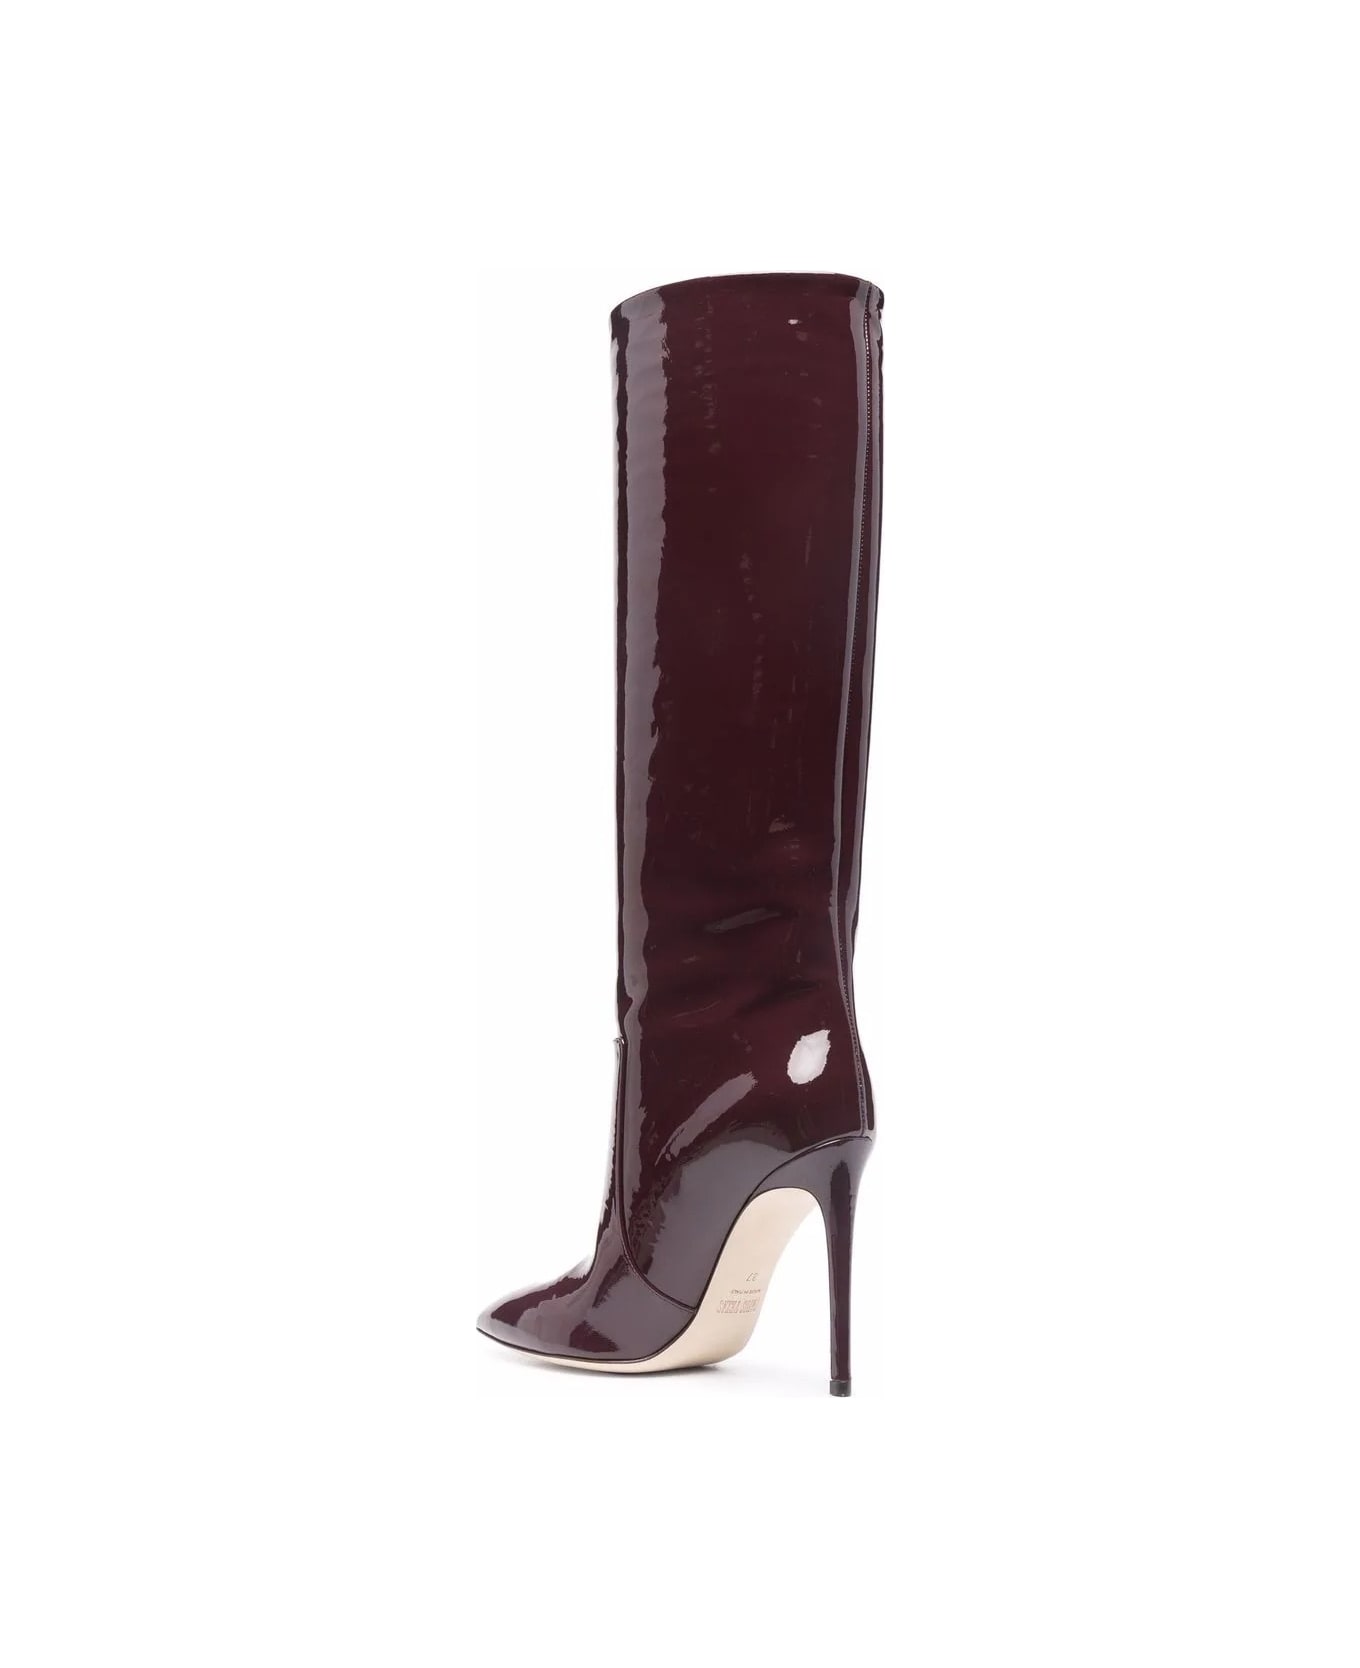 Paris Texas 105 Stiletto Boot In Burgundy Patent Leather - Red